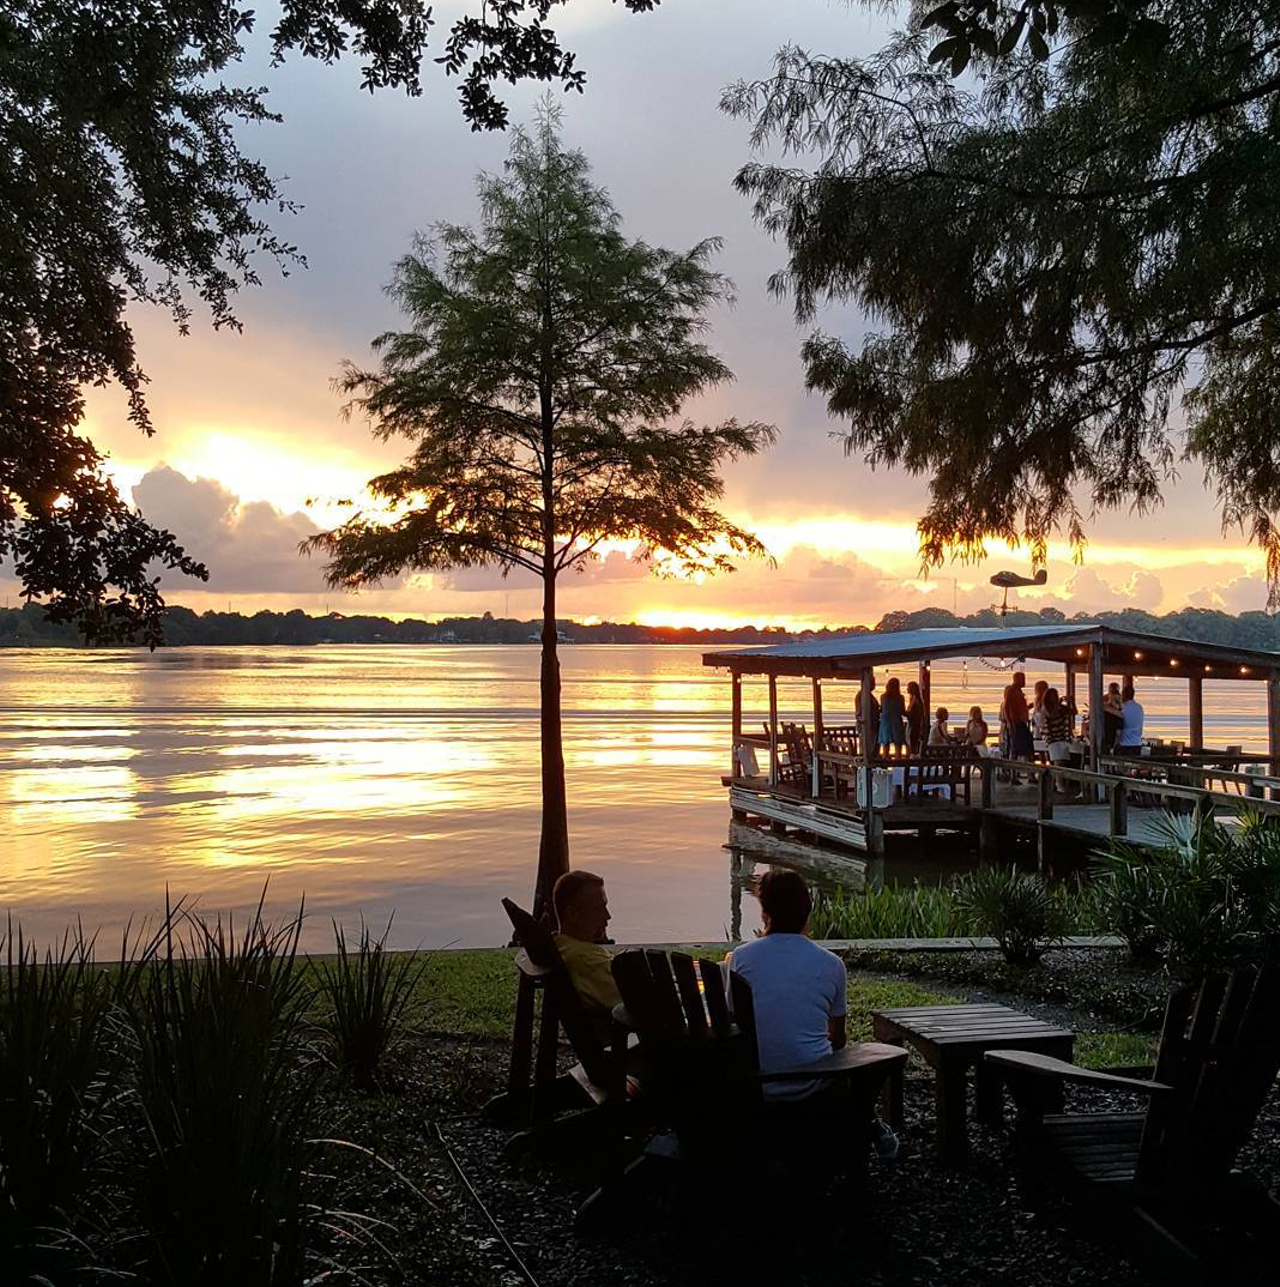 Hillstone
215 S Orlando Avenue, Winter Park ; 407-740-4005 
You can access Hillstone's glorious patio by car, boat or seaplane. Choose from a lunch, dinner and wine menu, and bask in the beautiful view of Lake Killarney.
Photo via Hillstone Photo via zfarls/ Instagram